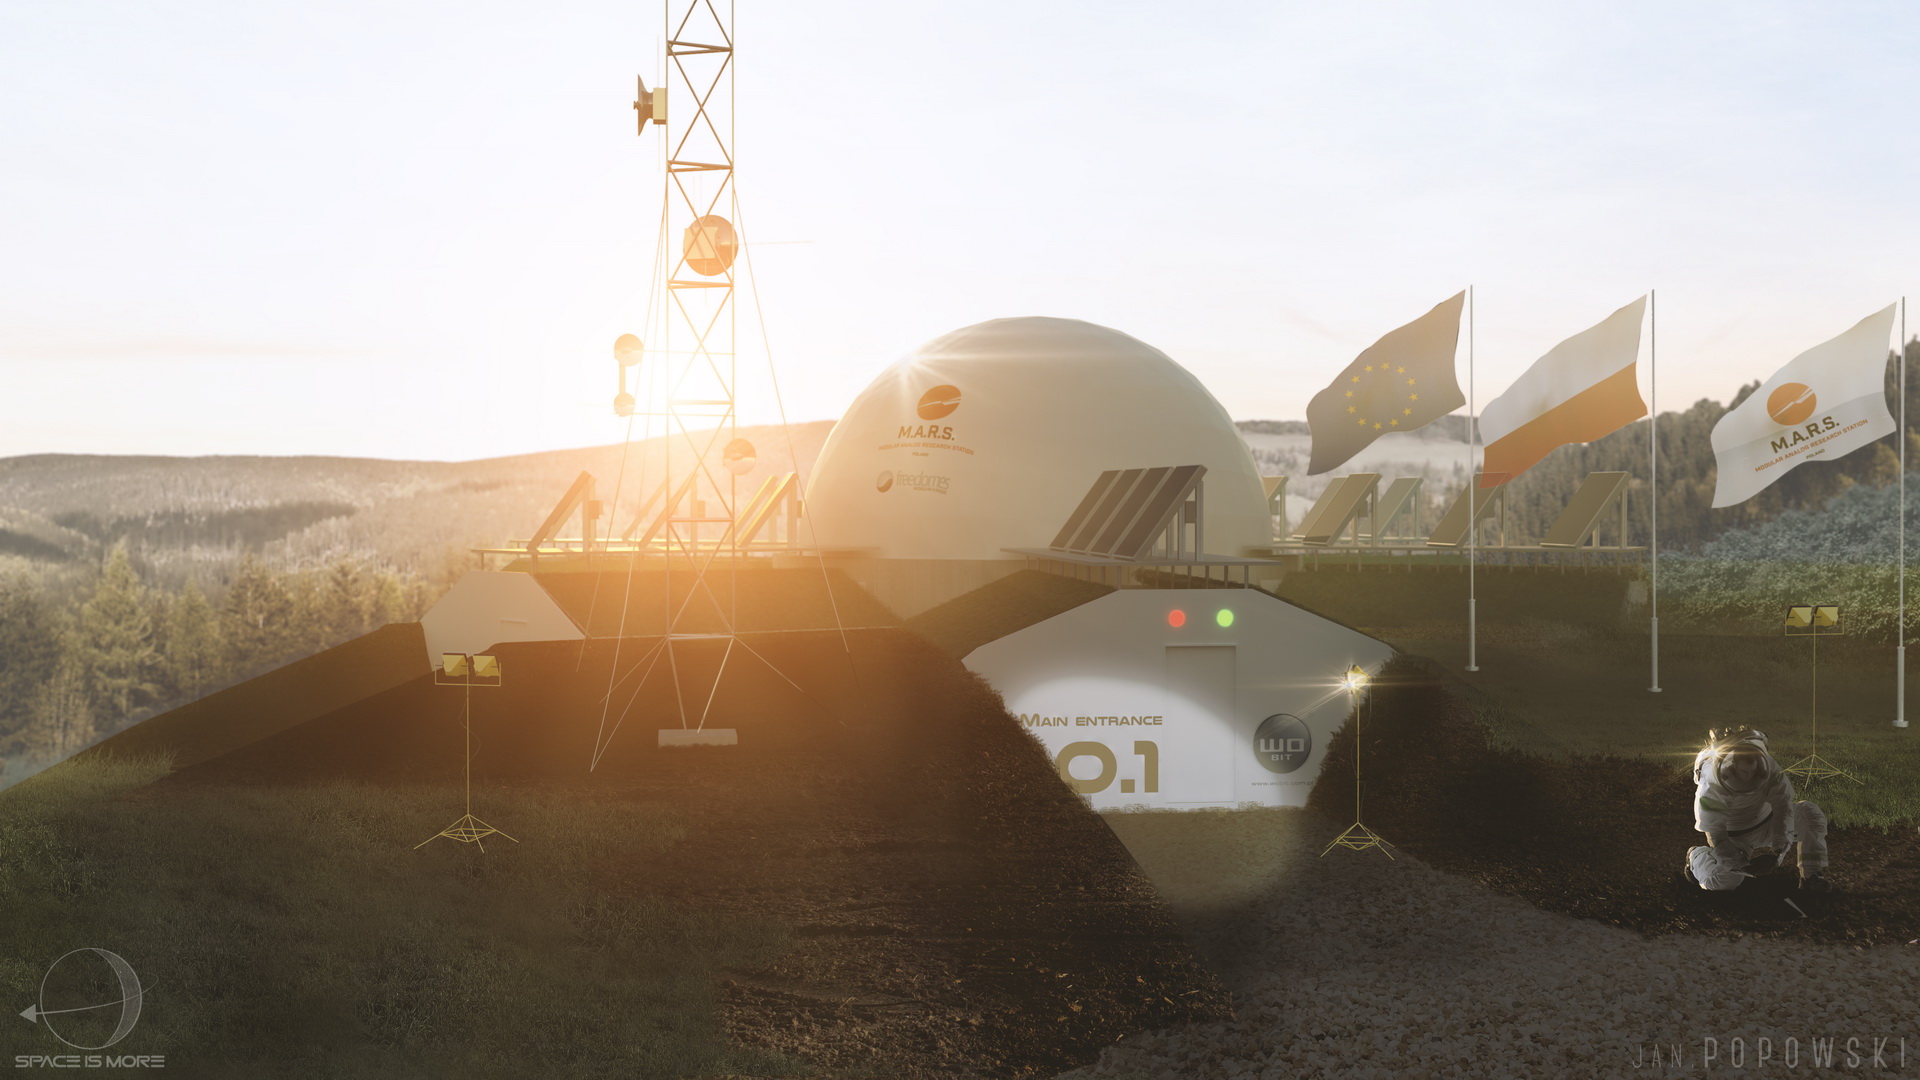 Poland will conduct an experiment to simulate life on Mars